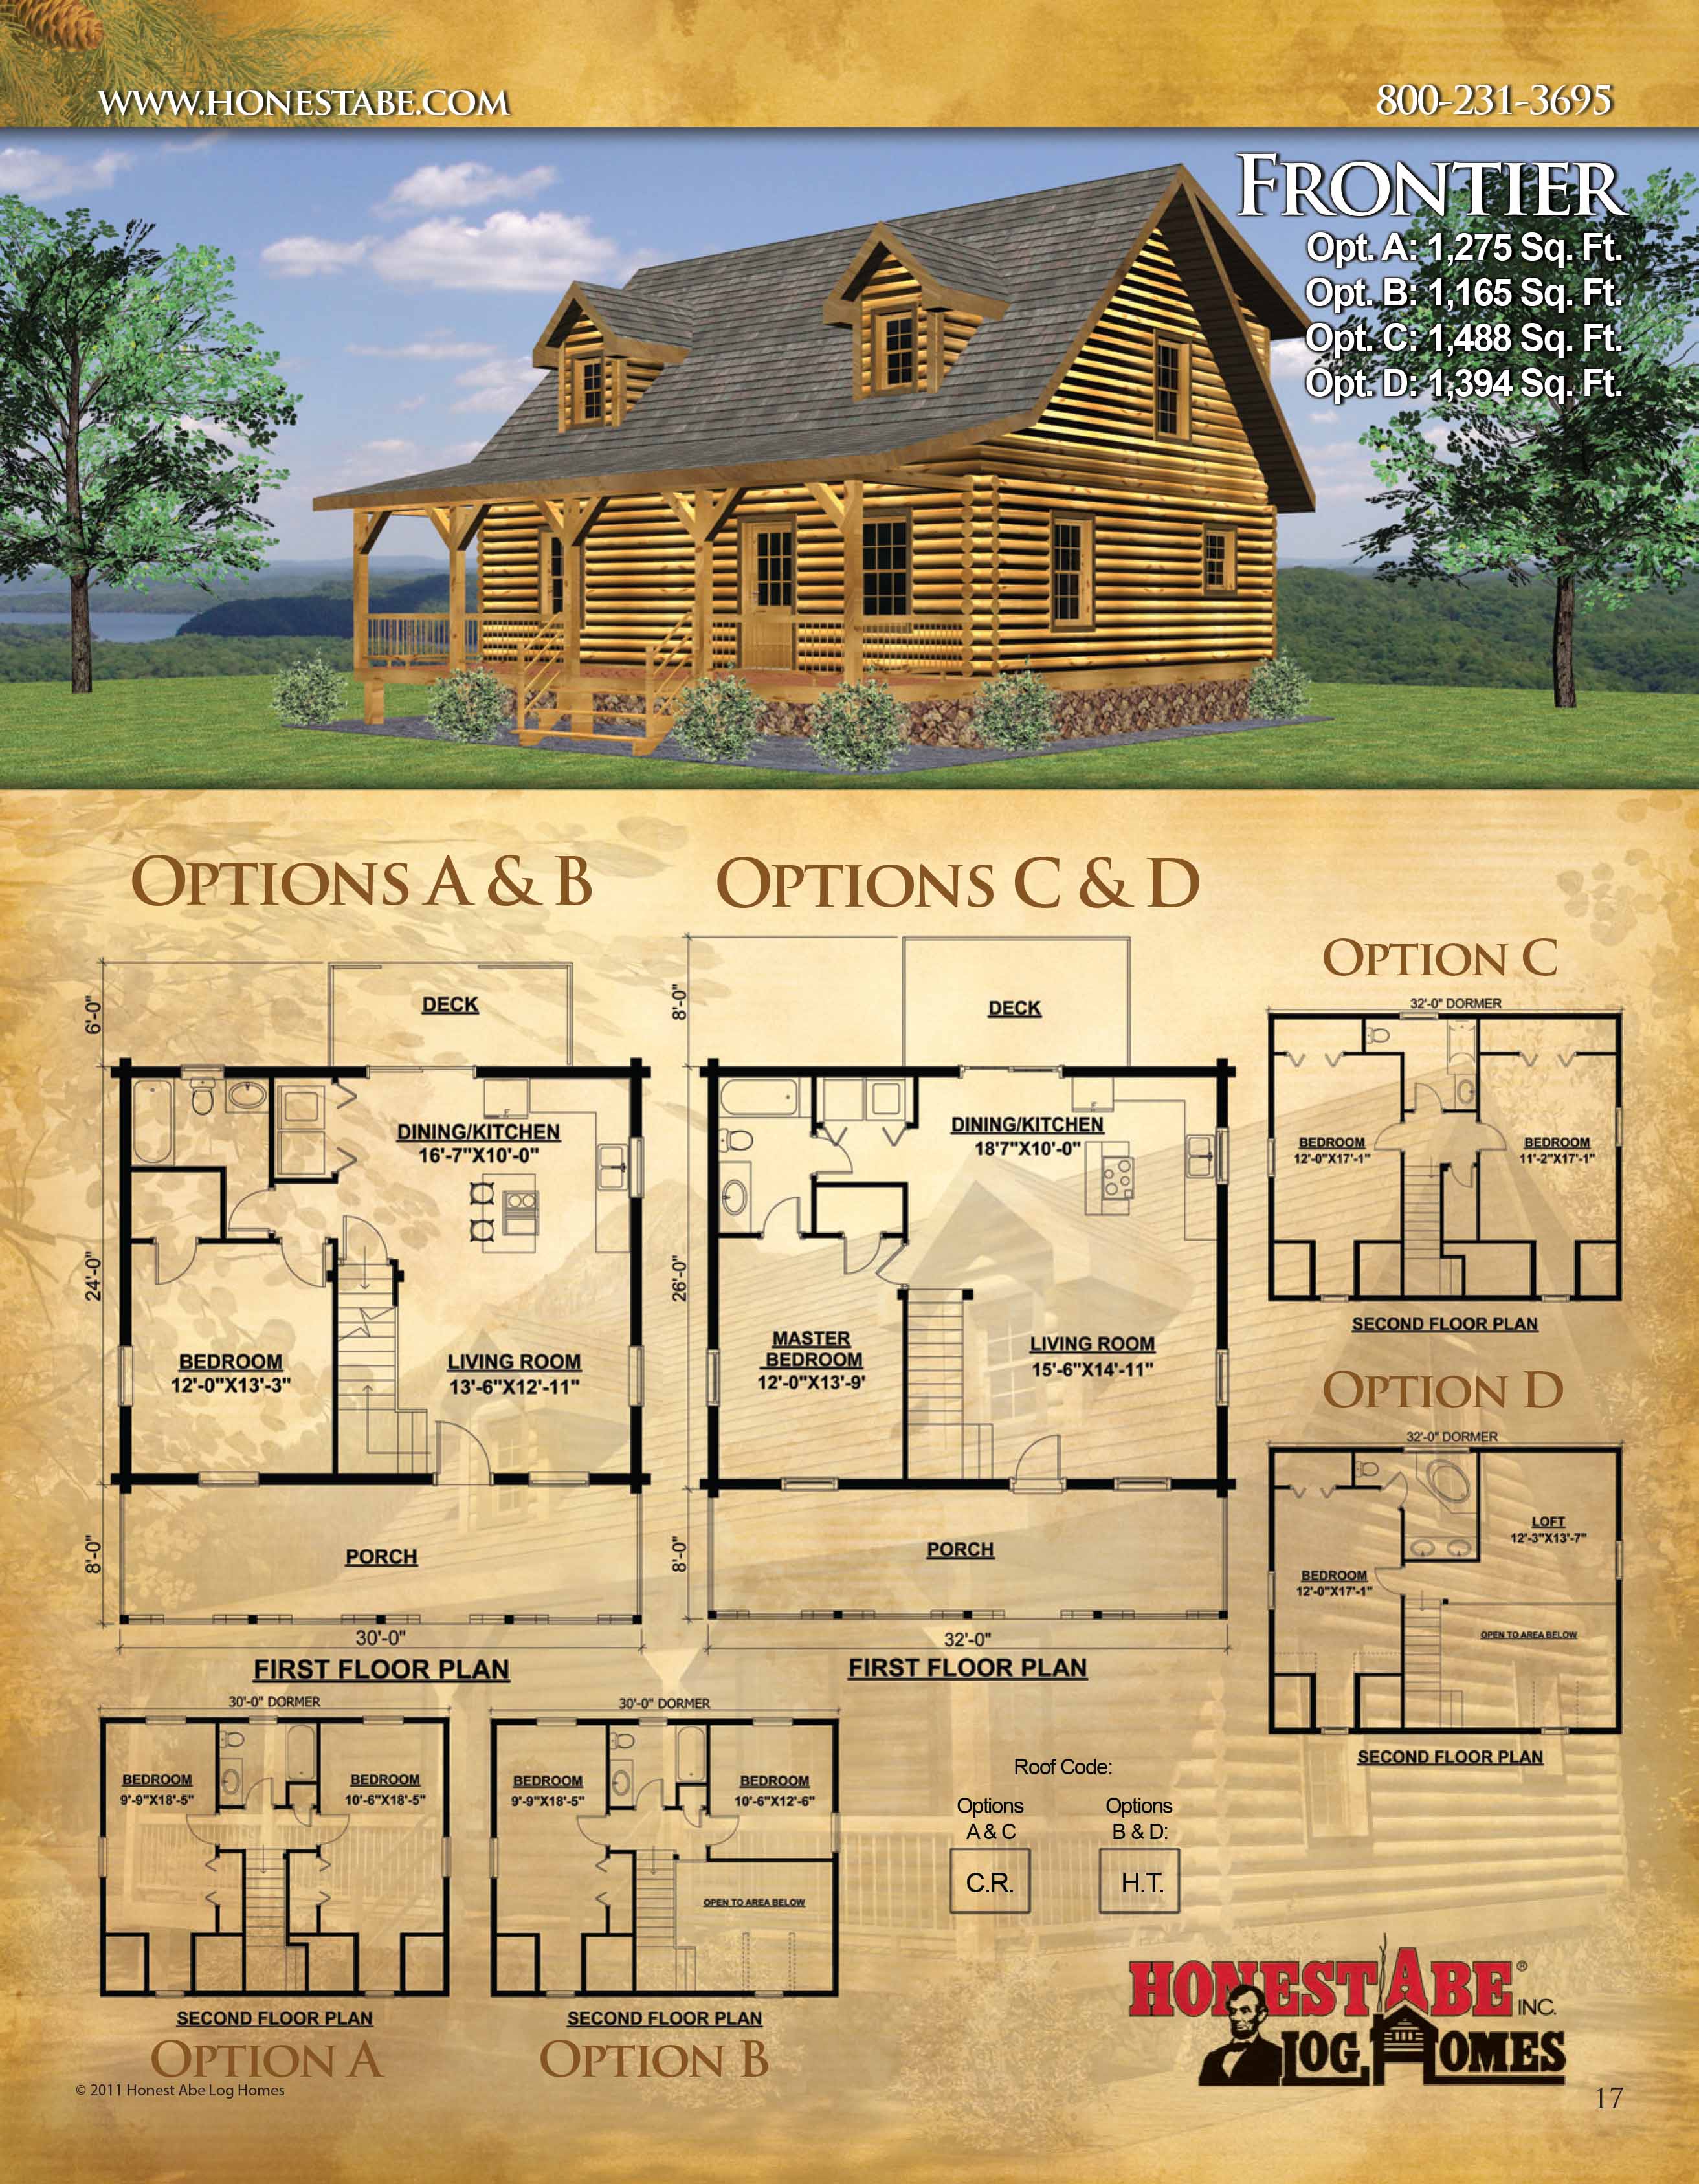 Browse Floor Plans for Our Custom Log Cabin Homes